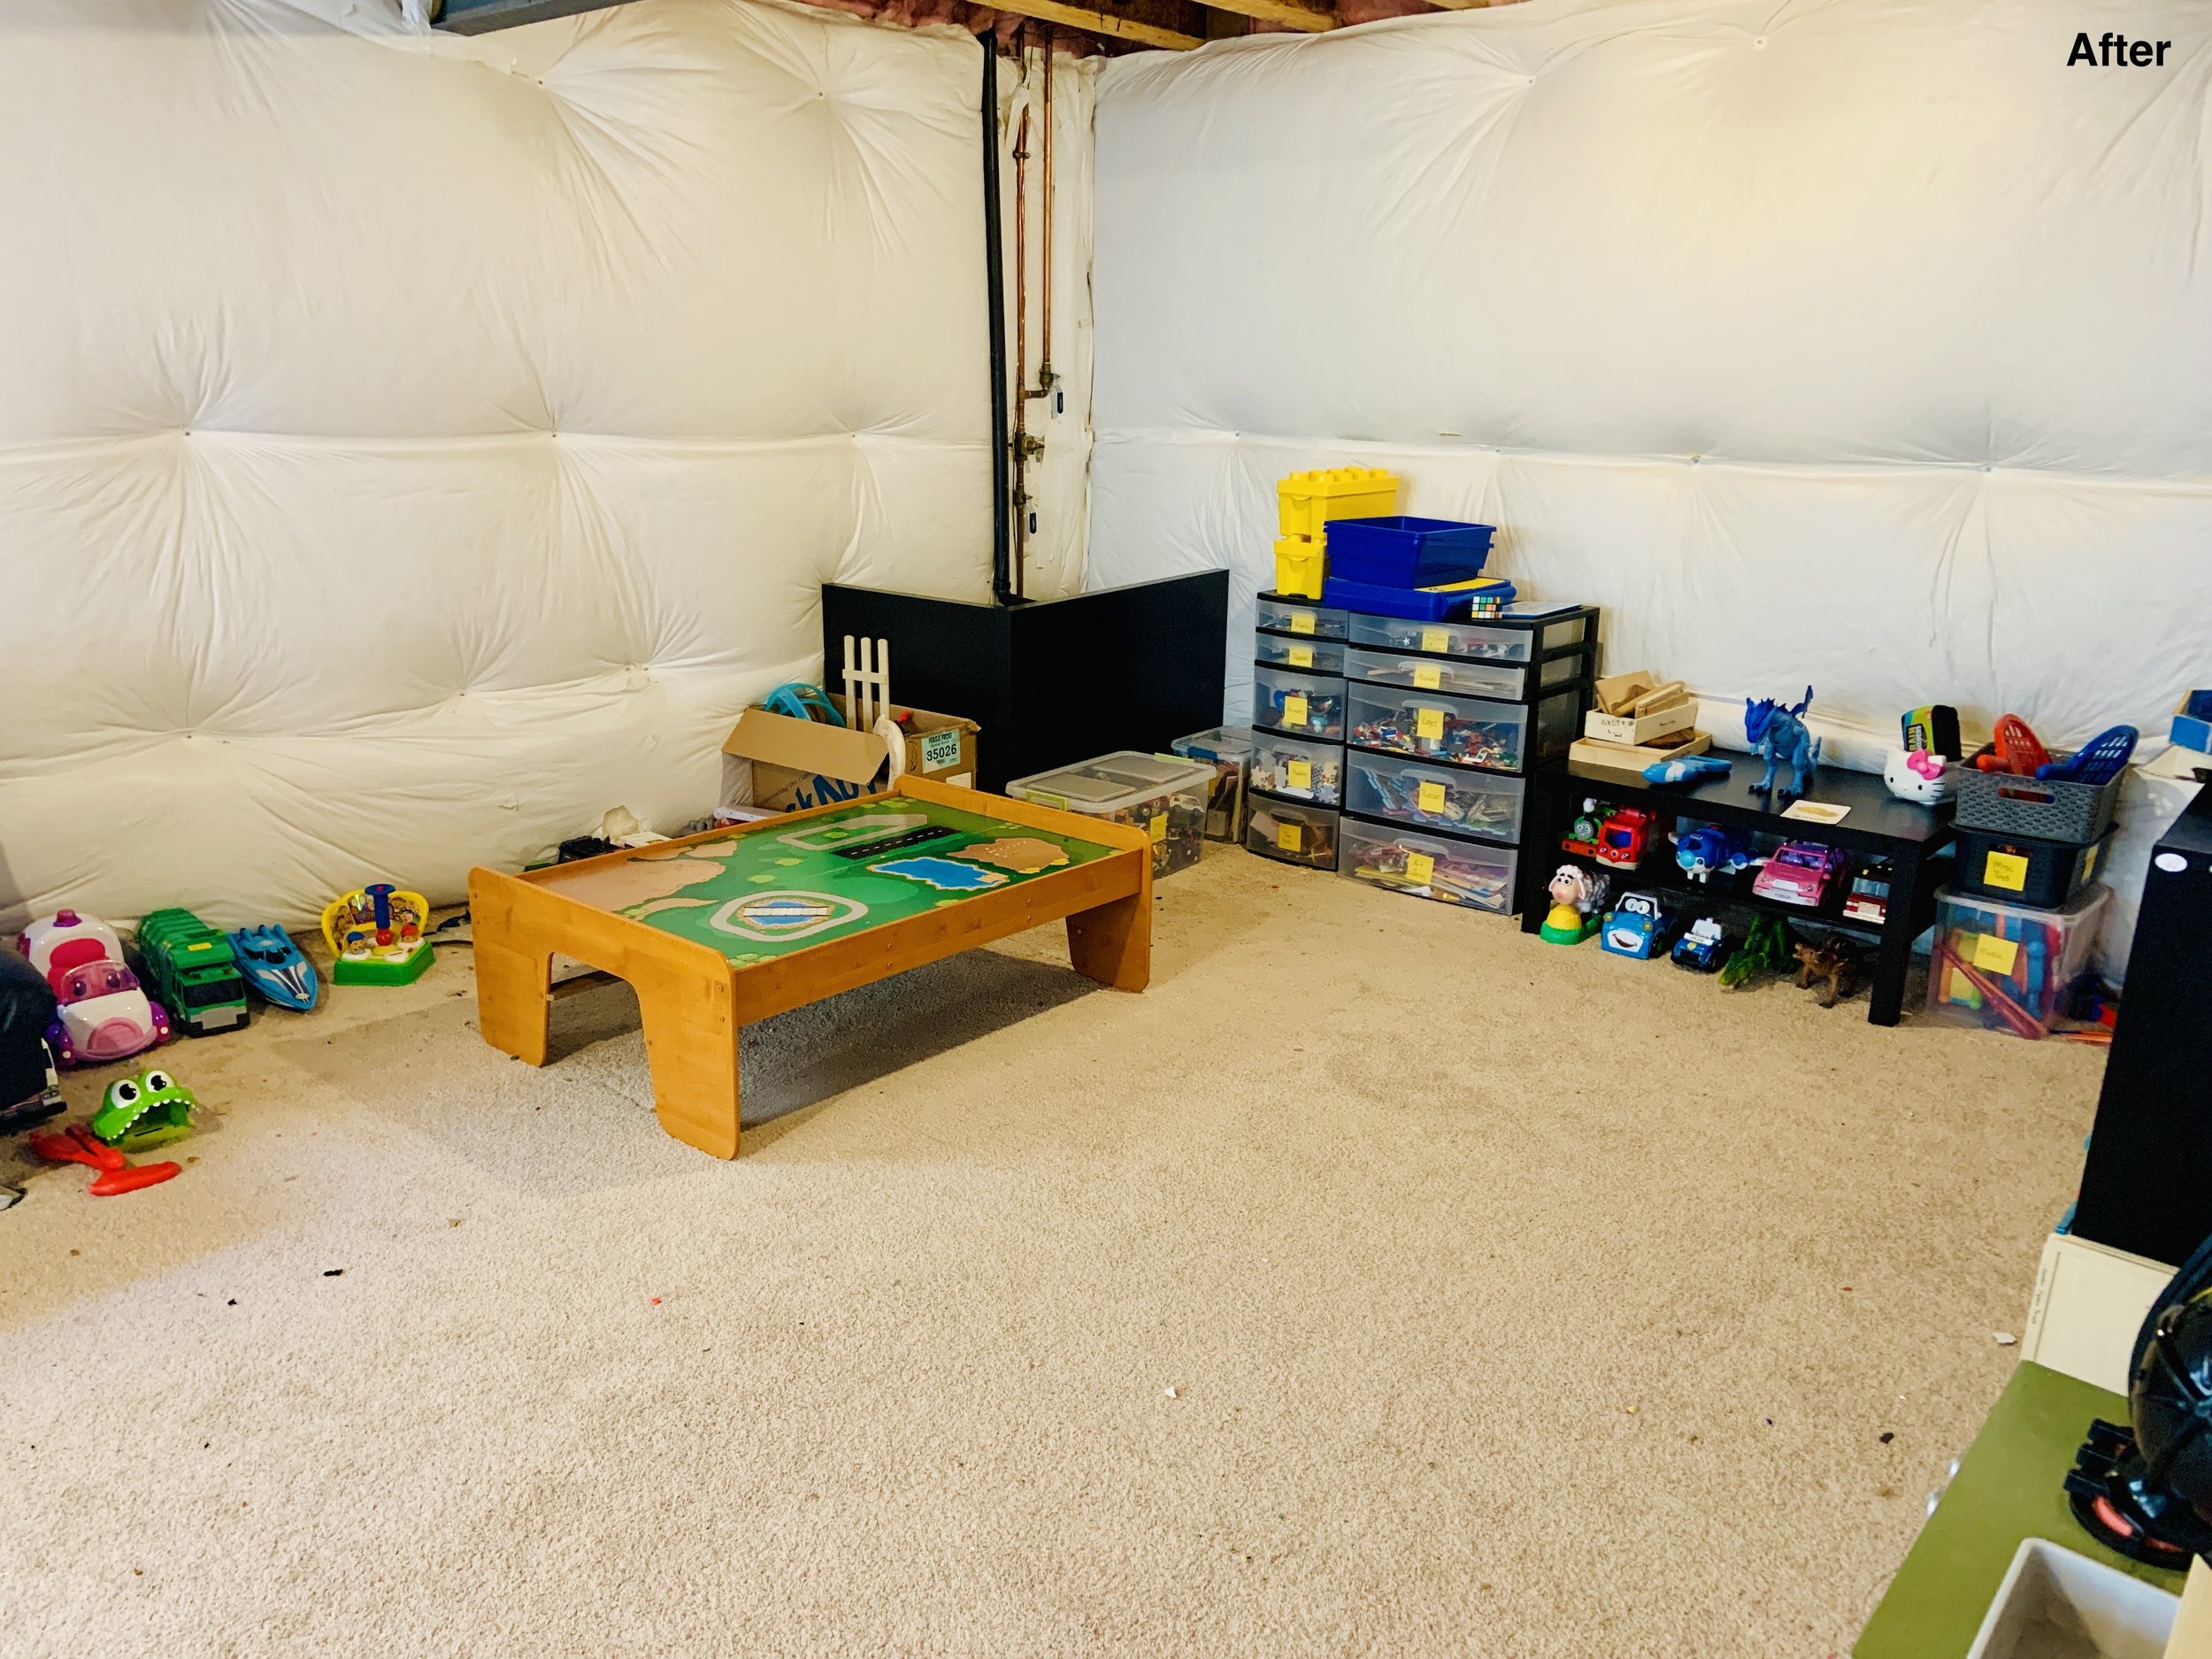 After photo of playroom with carpeted floor and toys around the edges in labeled containers and shelving units.